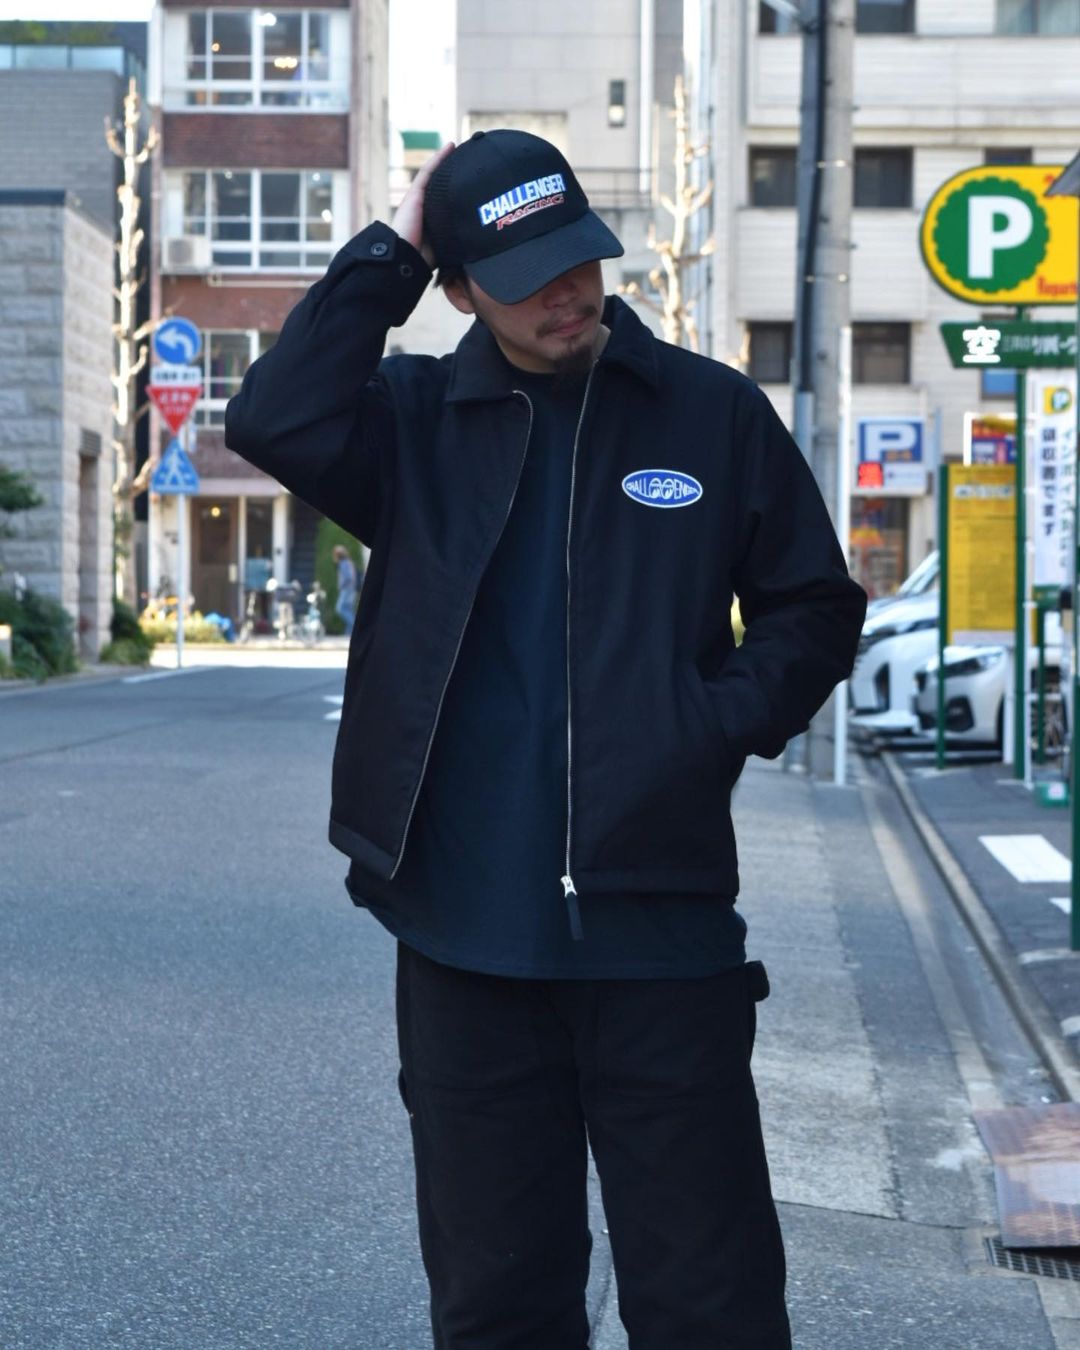 CHALLENGER / × MOON EQUIPPED WORK JACKET